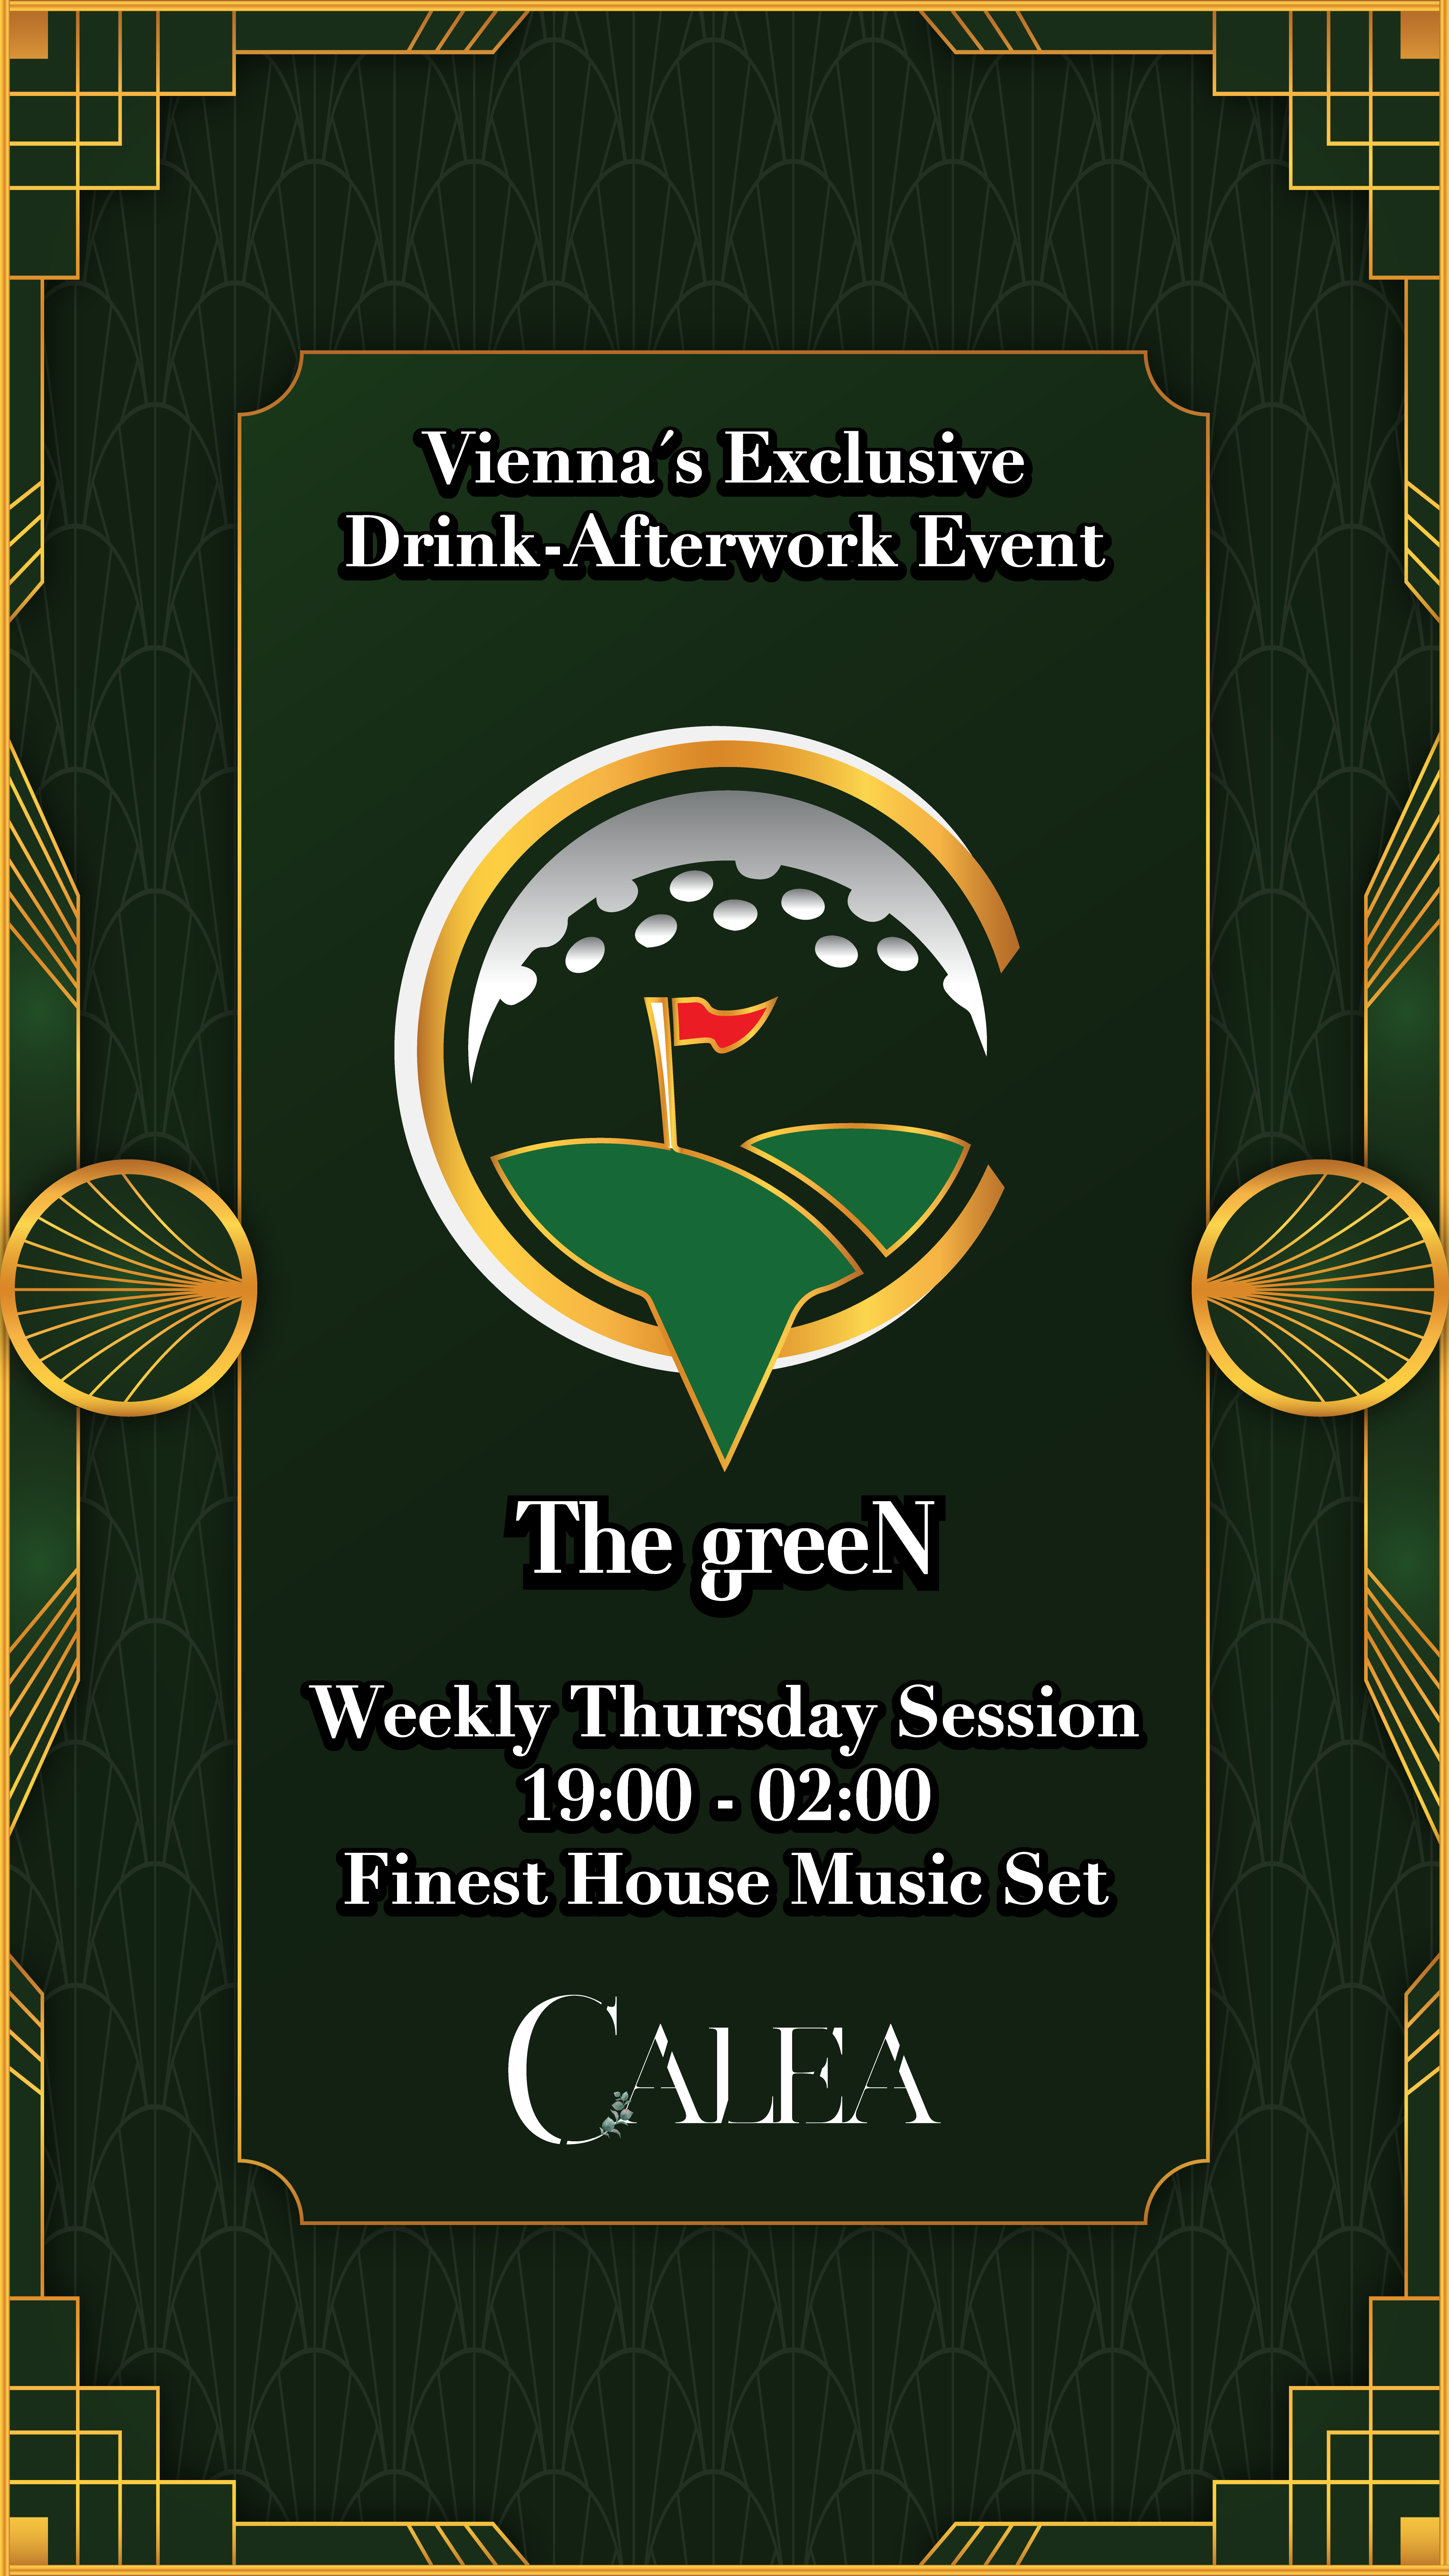 Weekly Thursday Session am 9. March 2023 @ The Green Vienna.